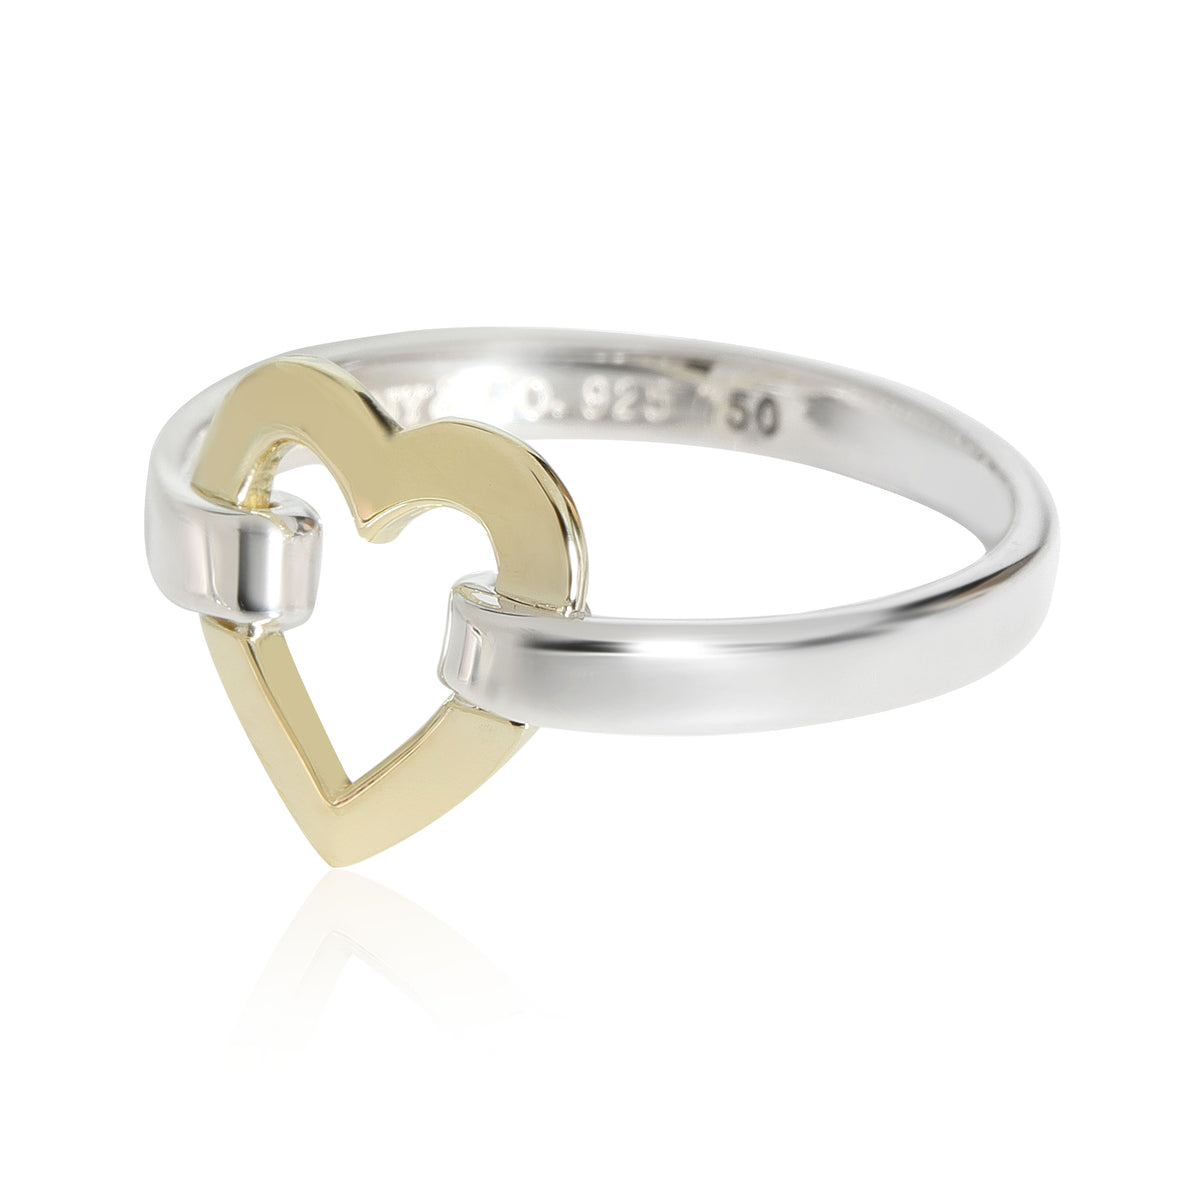 Tiffany & Co. Open Heart Ring in 18K Yellow Gold & Sterling